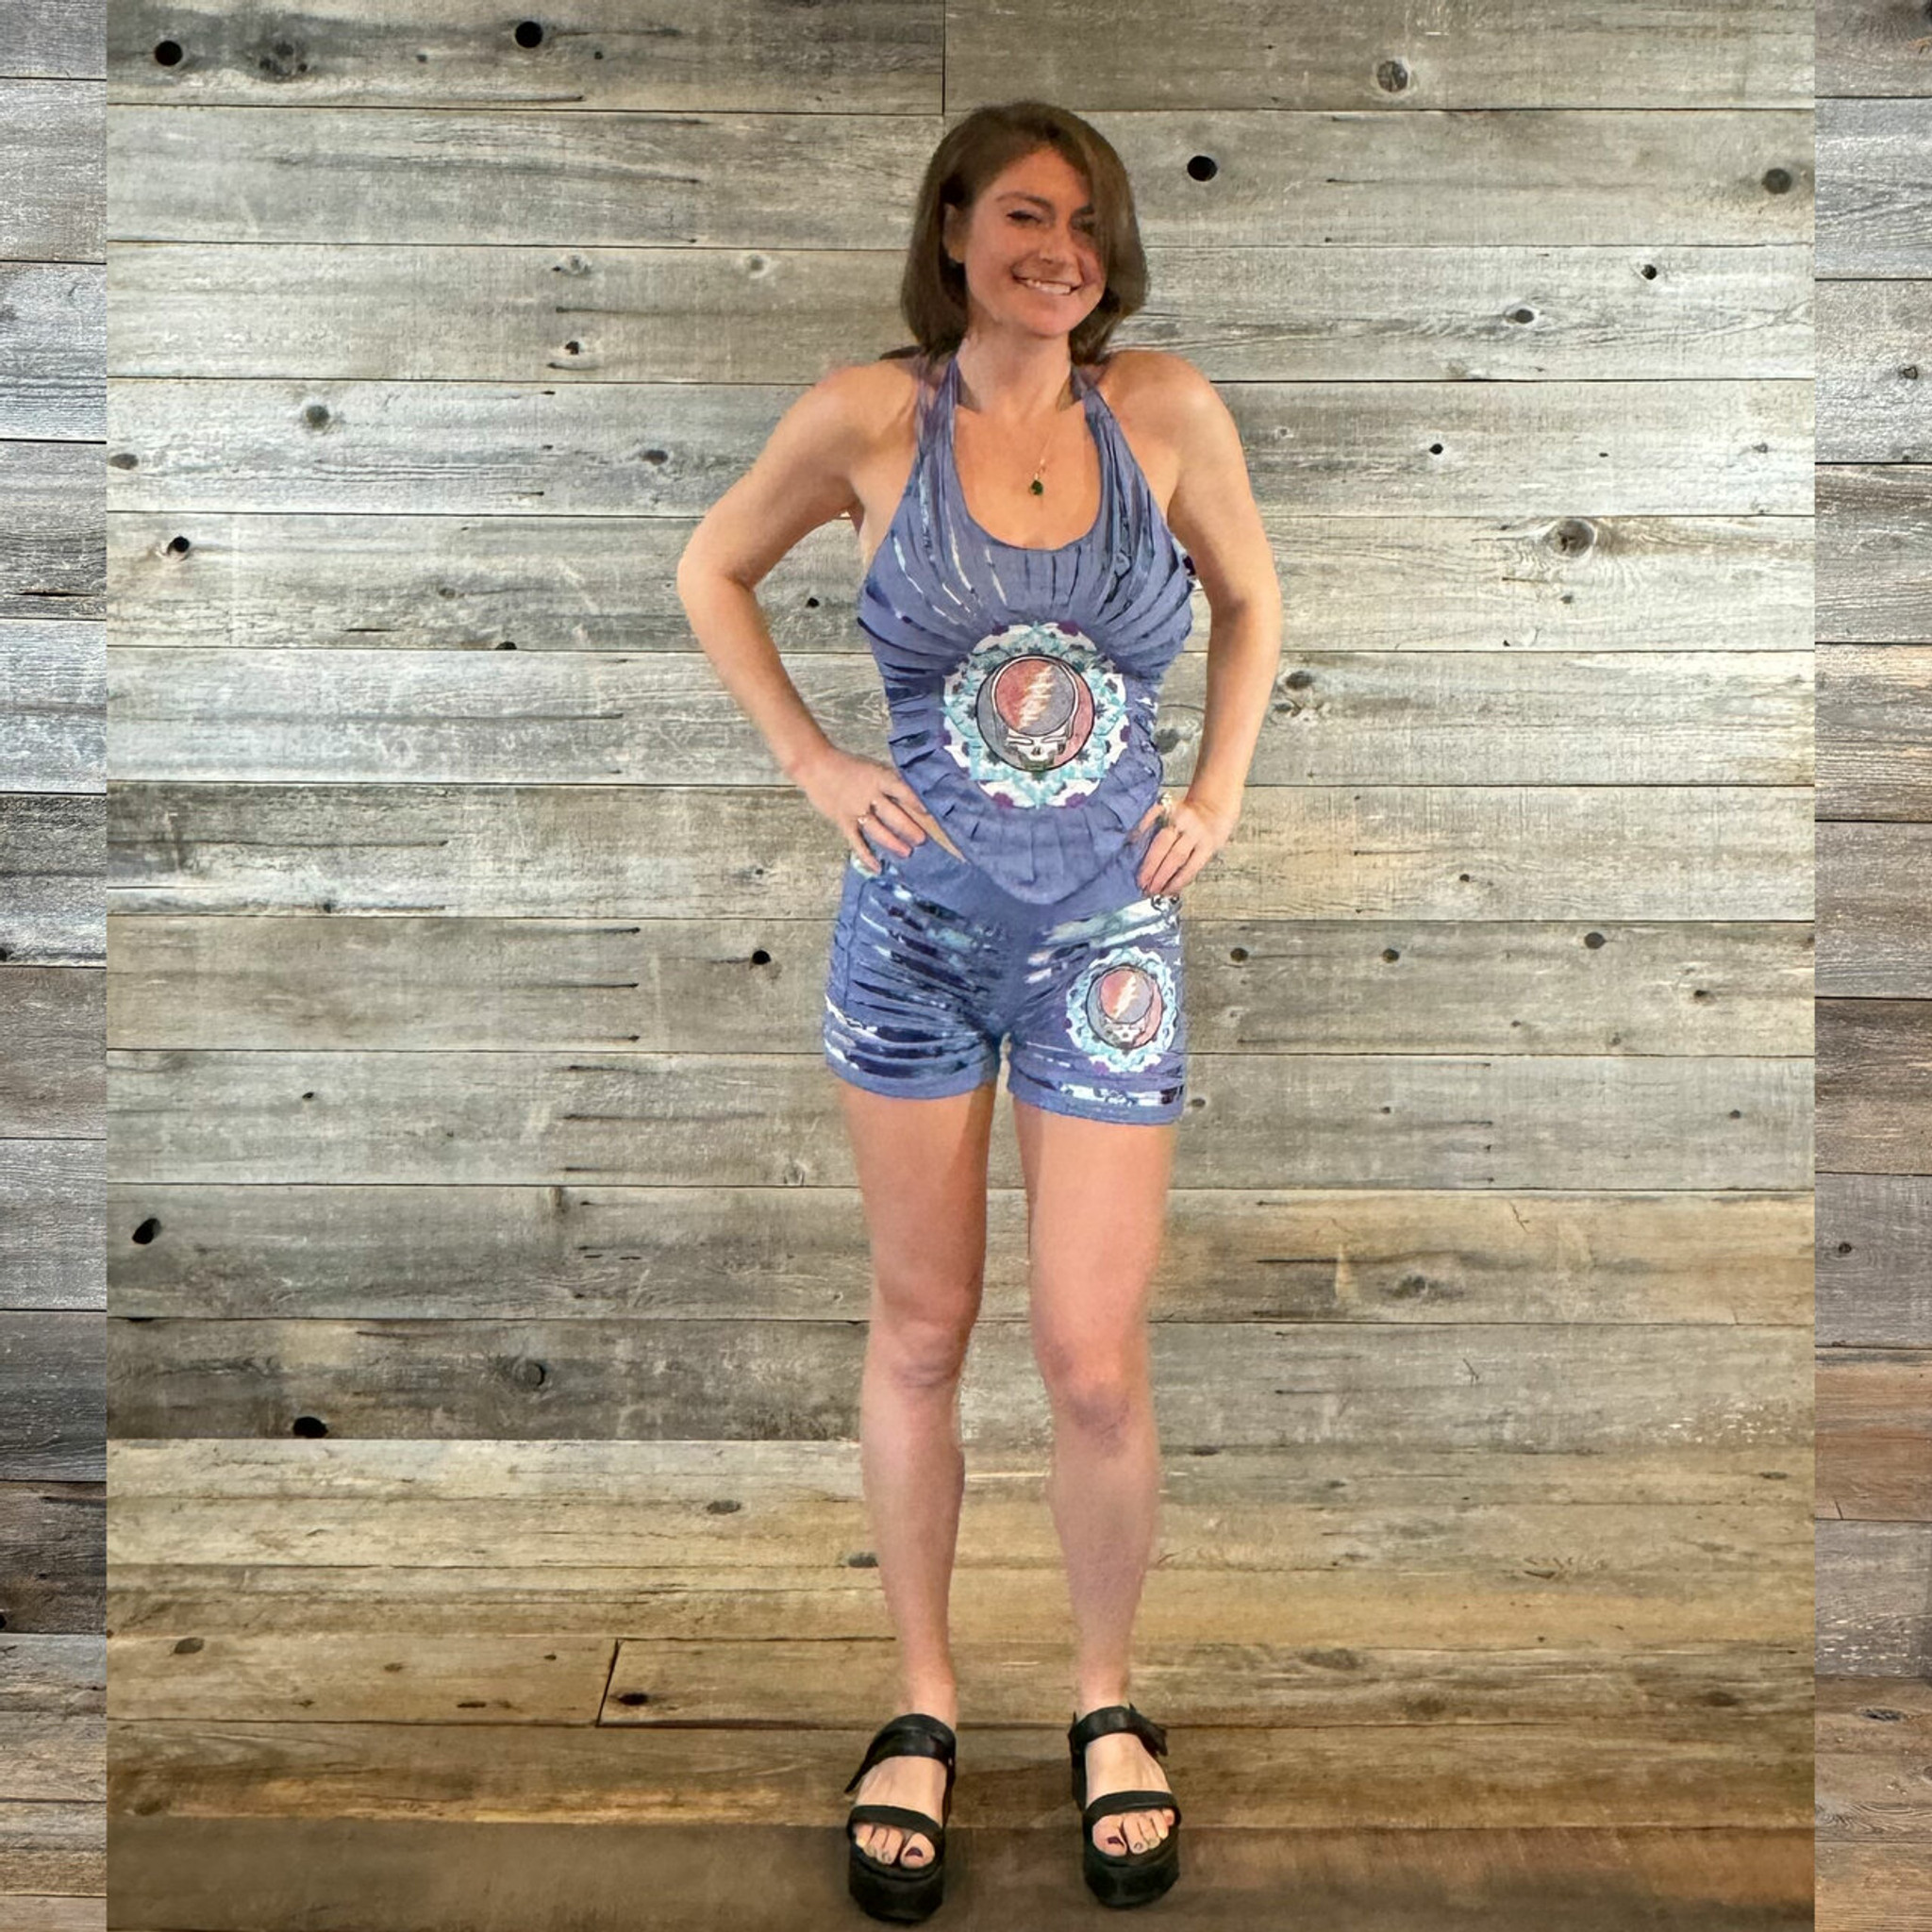 LOOSE LUCY SHORTS Grateful Dead Cotton Lycra Razor Cut Tie Dye w/ Embroidered Steal Your Face Mandala Booty Shorts